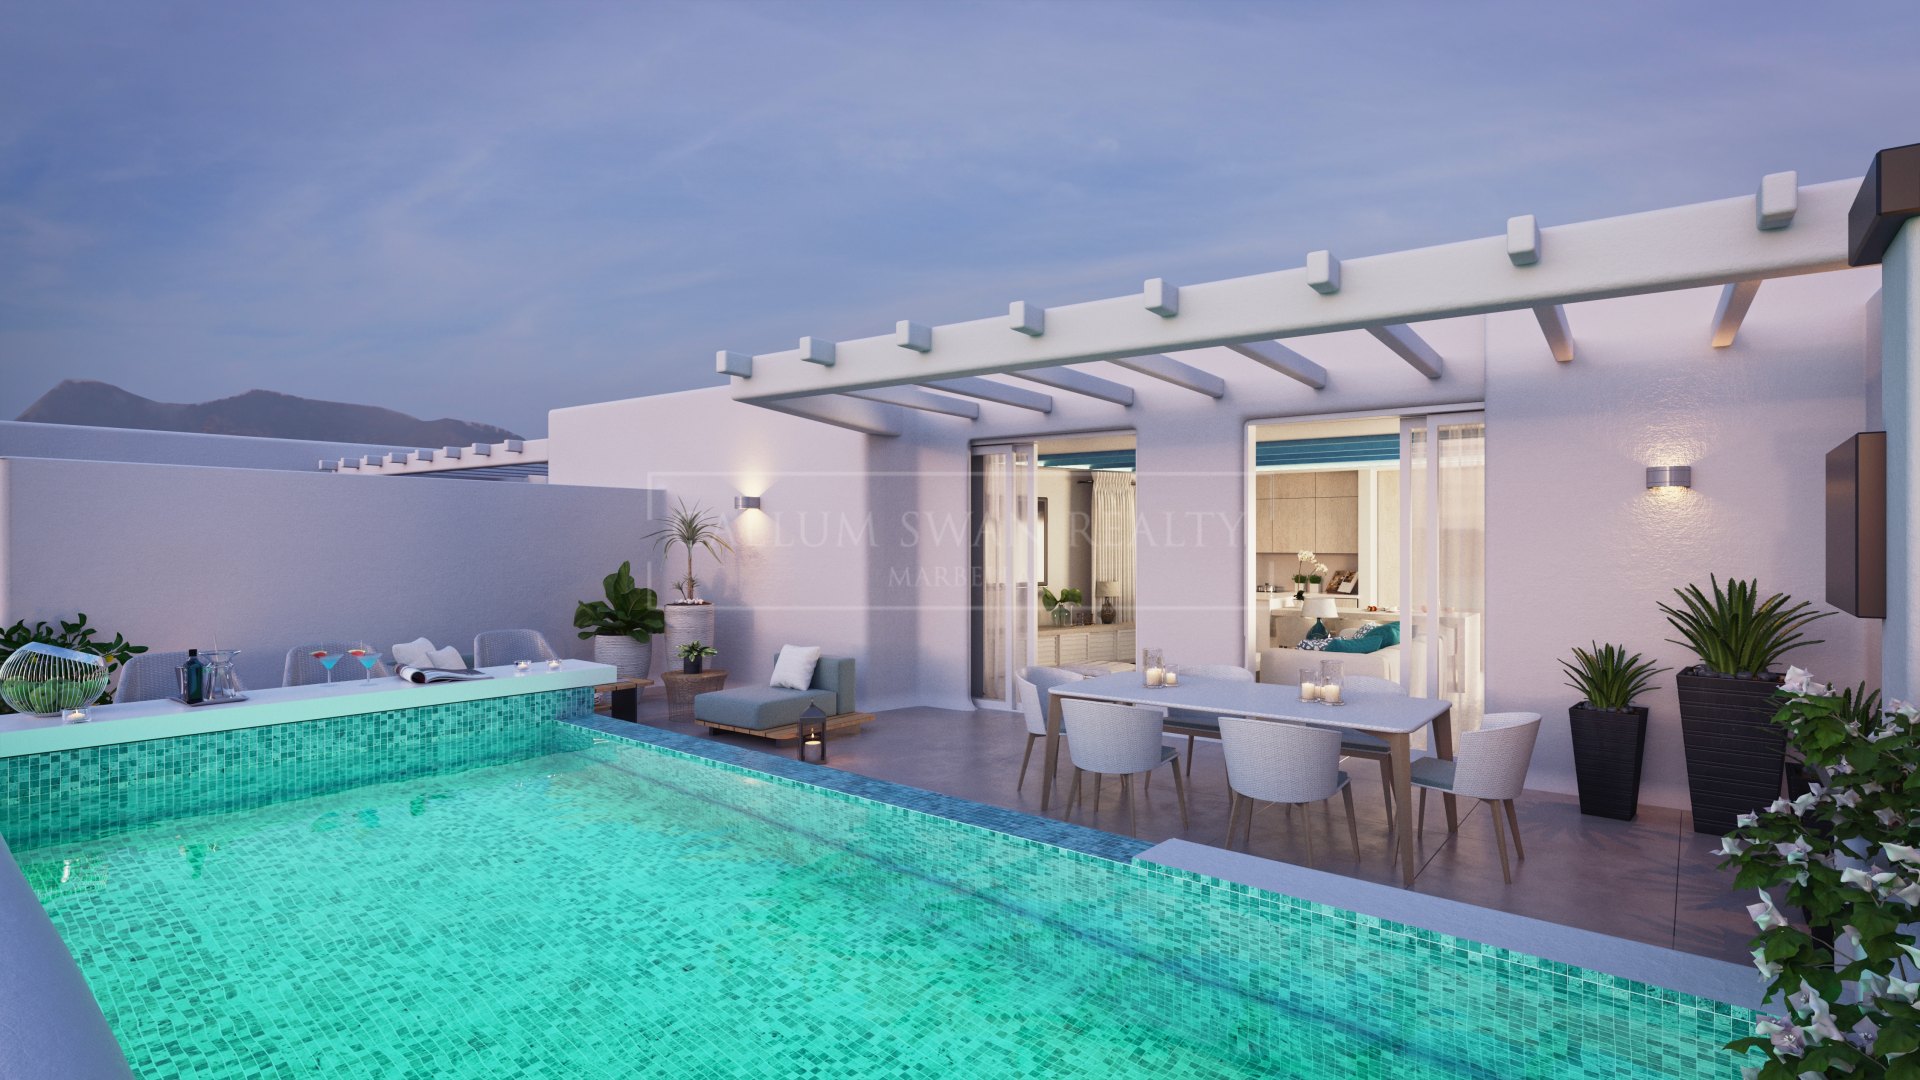 A new project of 6 unique apartments for sale in Marbella old town